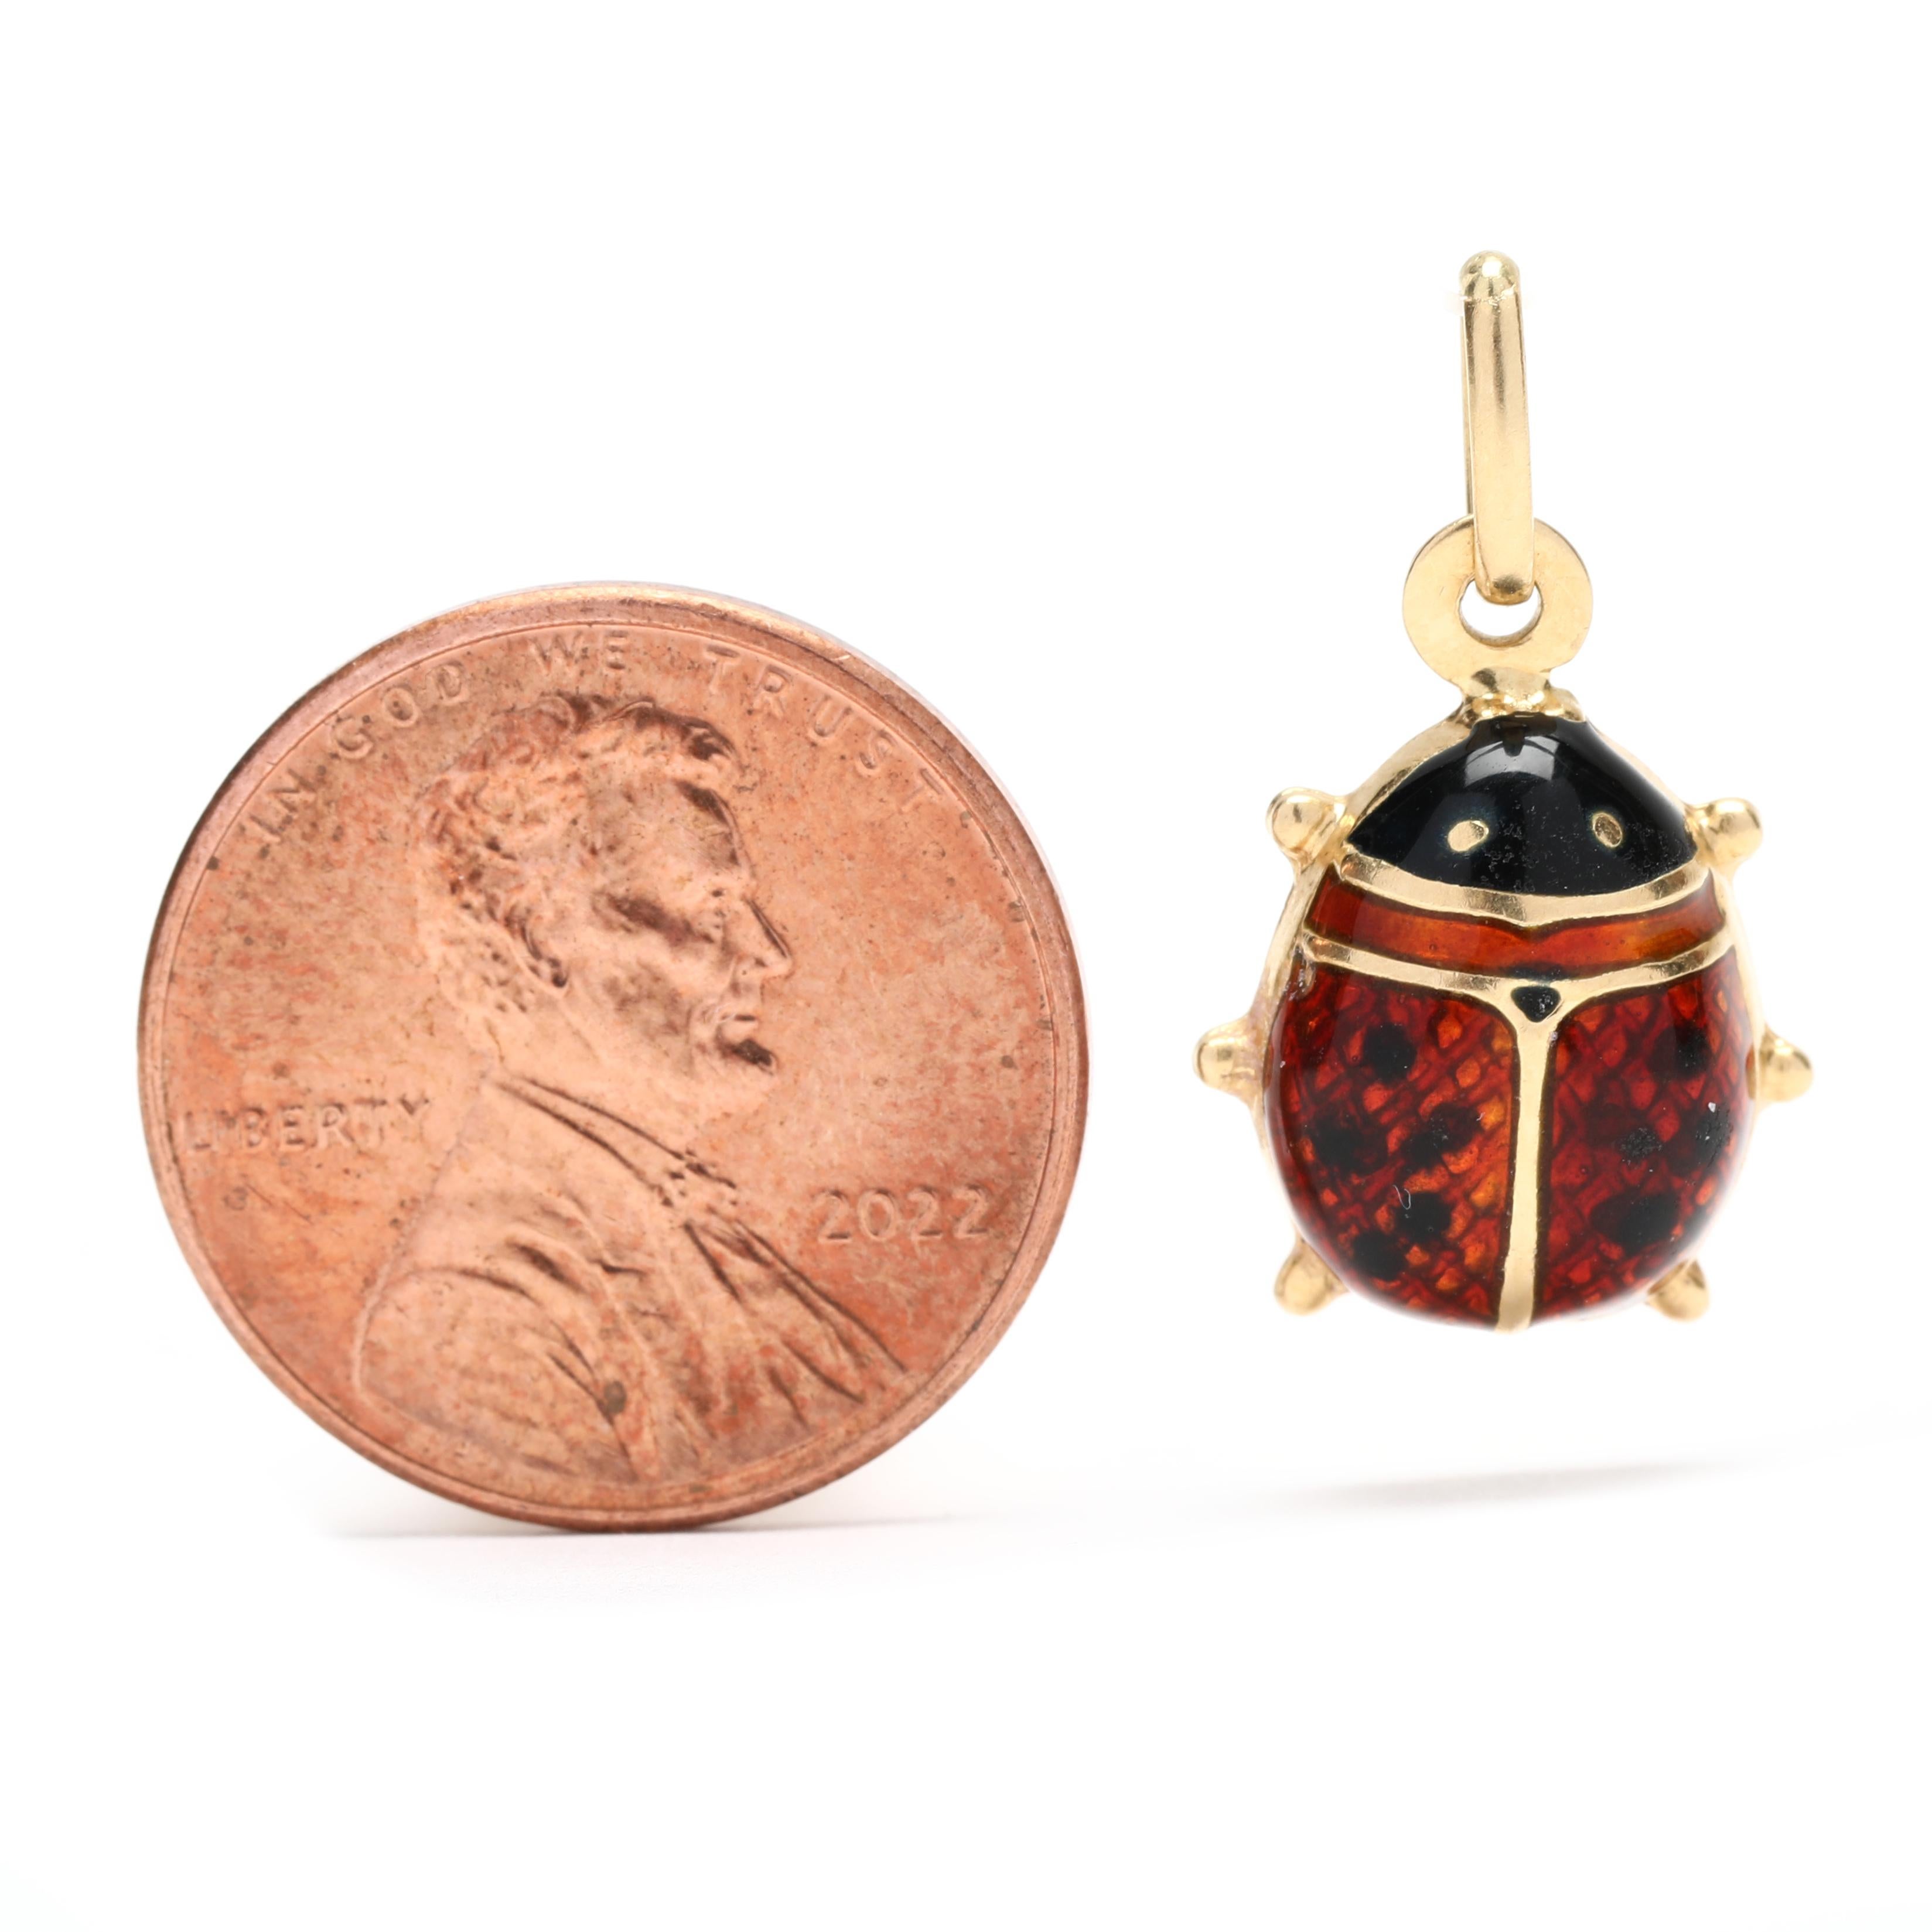 This gorgeous little Italian Red Enamel Ladybug Charm is crafted from 18K Yellow Gold. It measures 3/4 inch long and is the perfect size for any charm bracelet or necklace. The beautiful red enamel and intricate detailing make this small gold